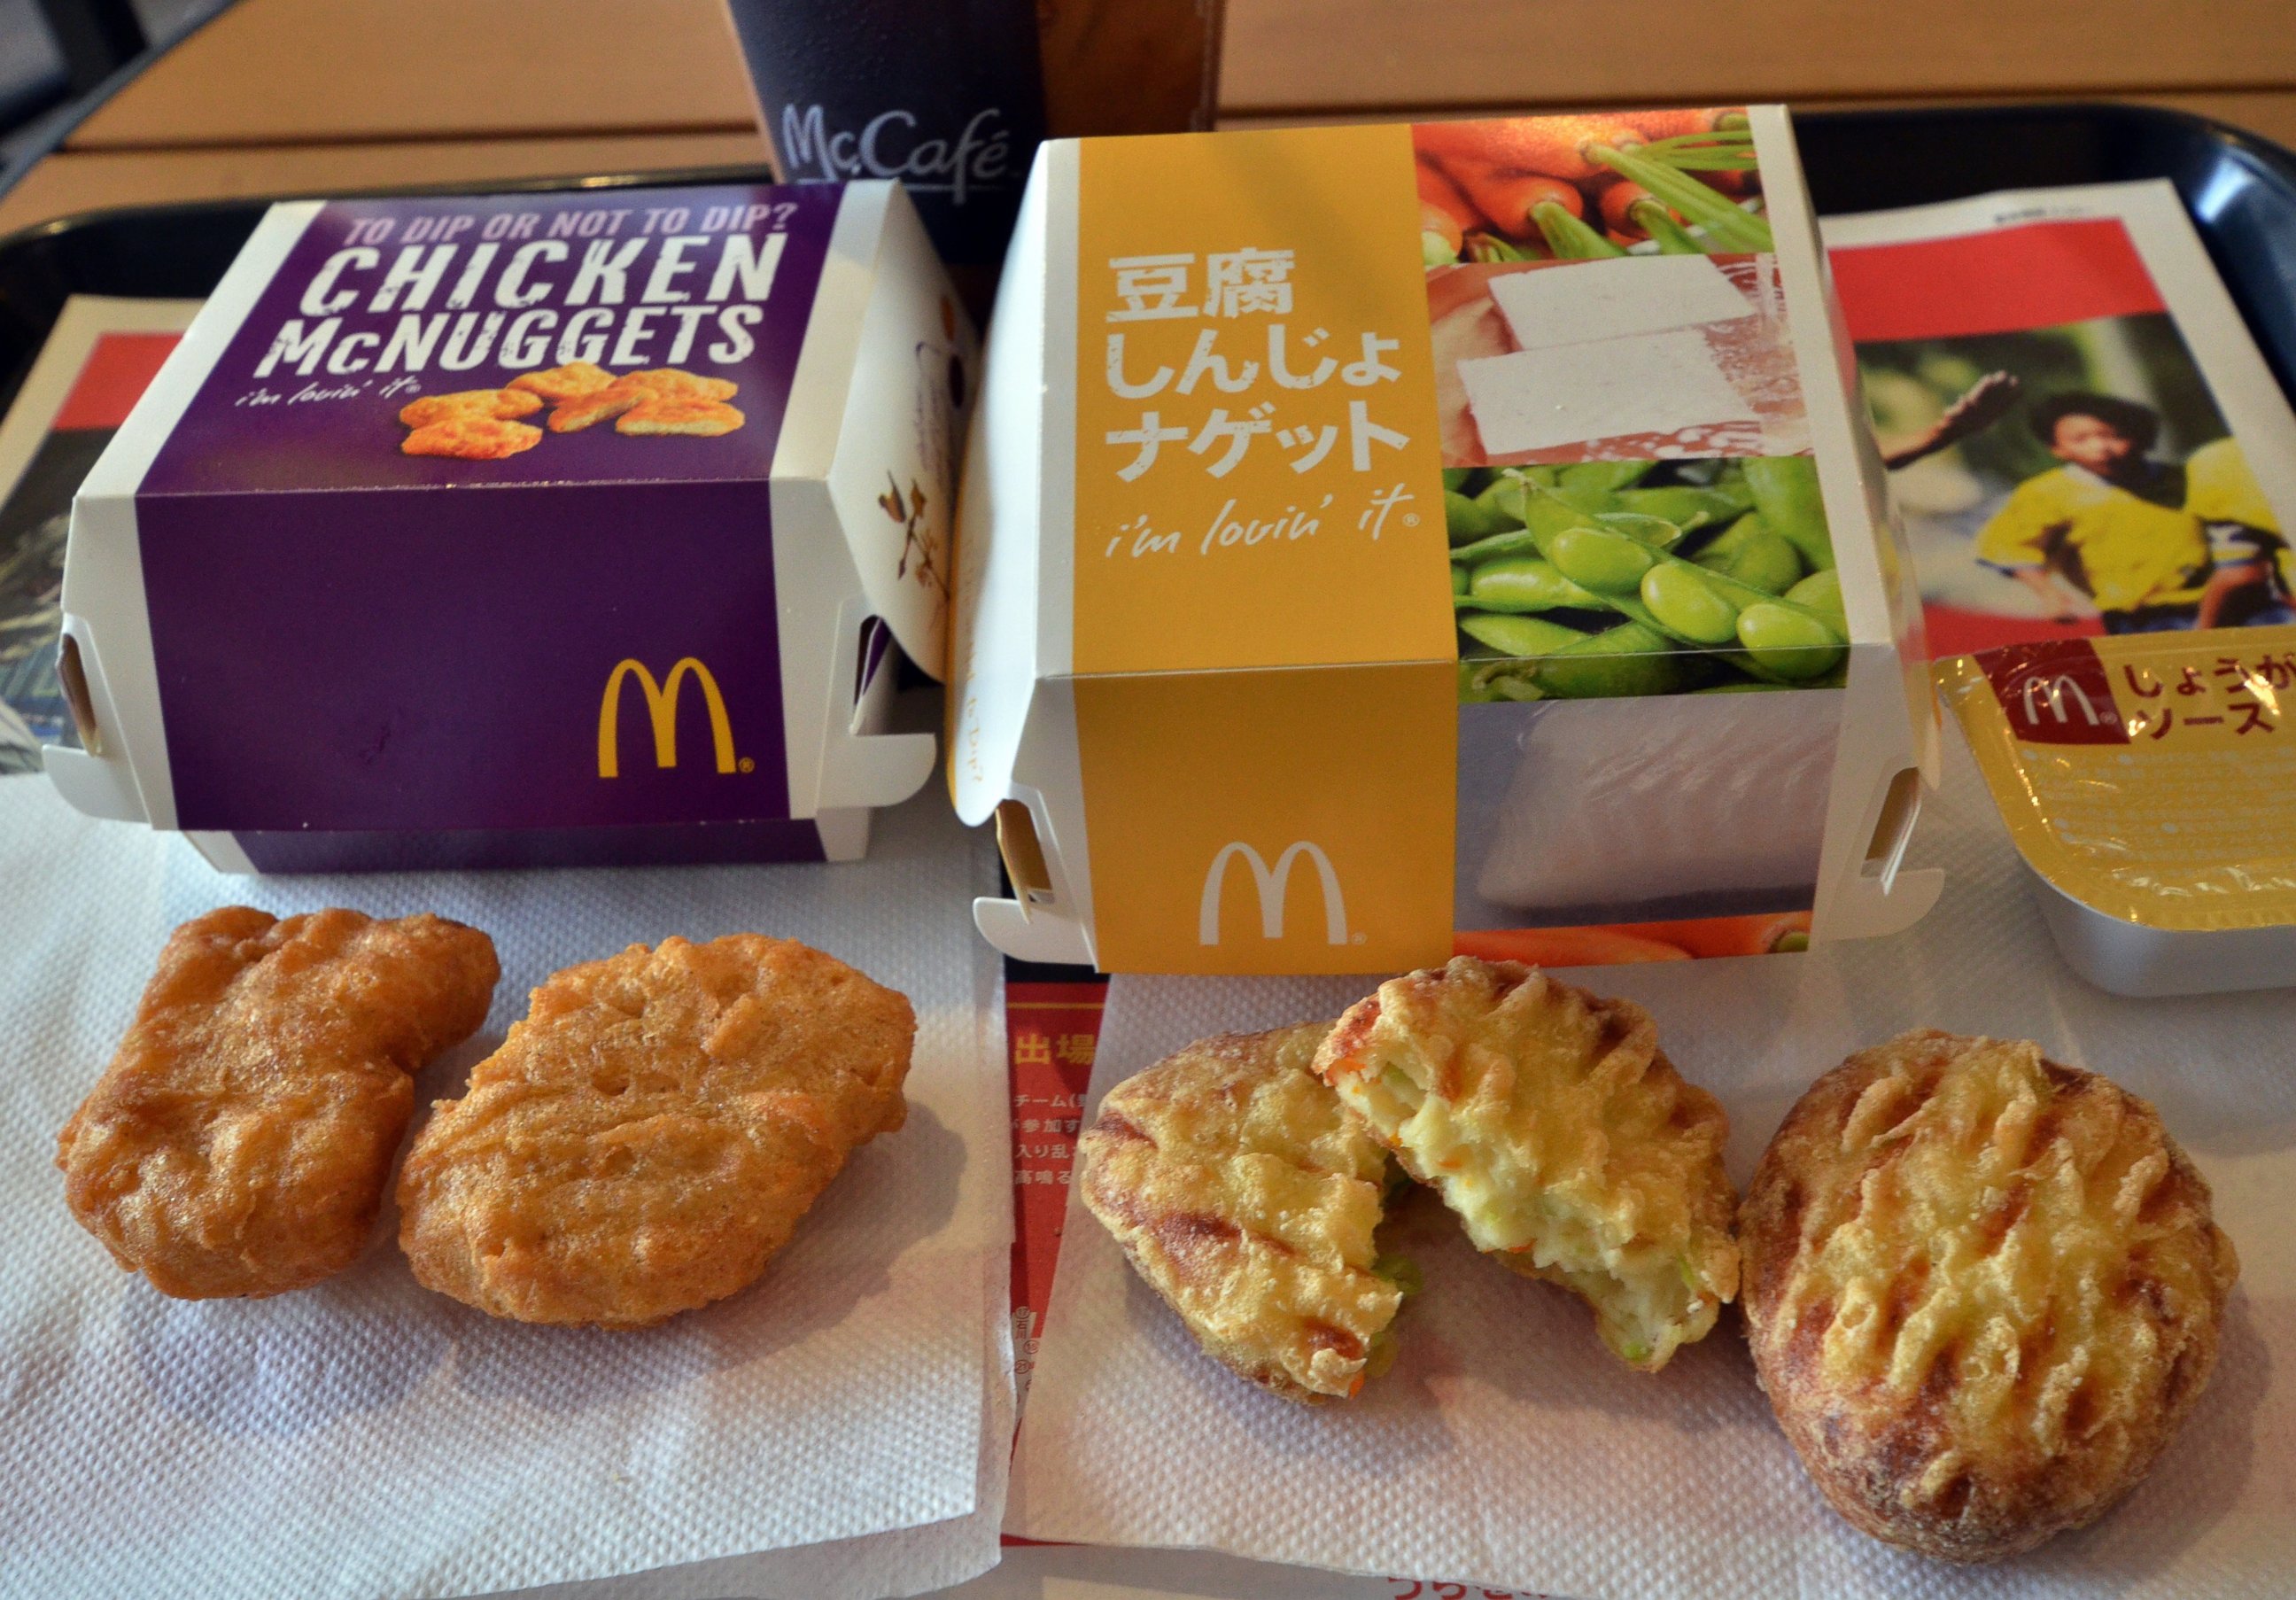 PHOTO: Tofu Shinjo Nuggets, right, and Chicken McNuggets, left, are displayed at a McDonald's restaurant in Tokyo on July 30, 2014. 